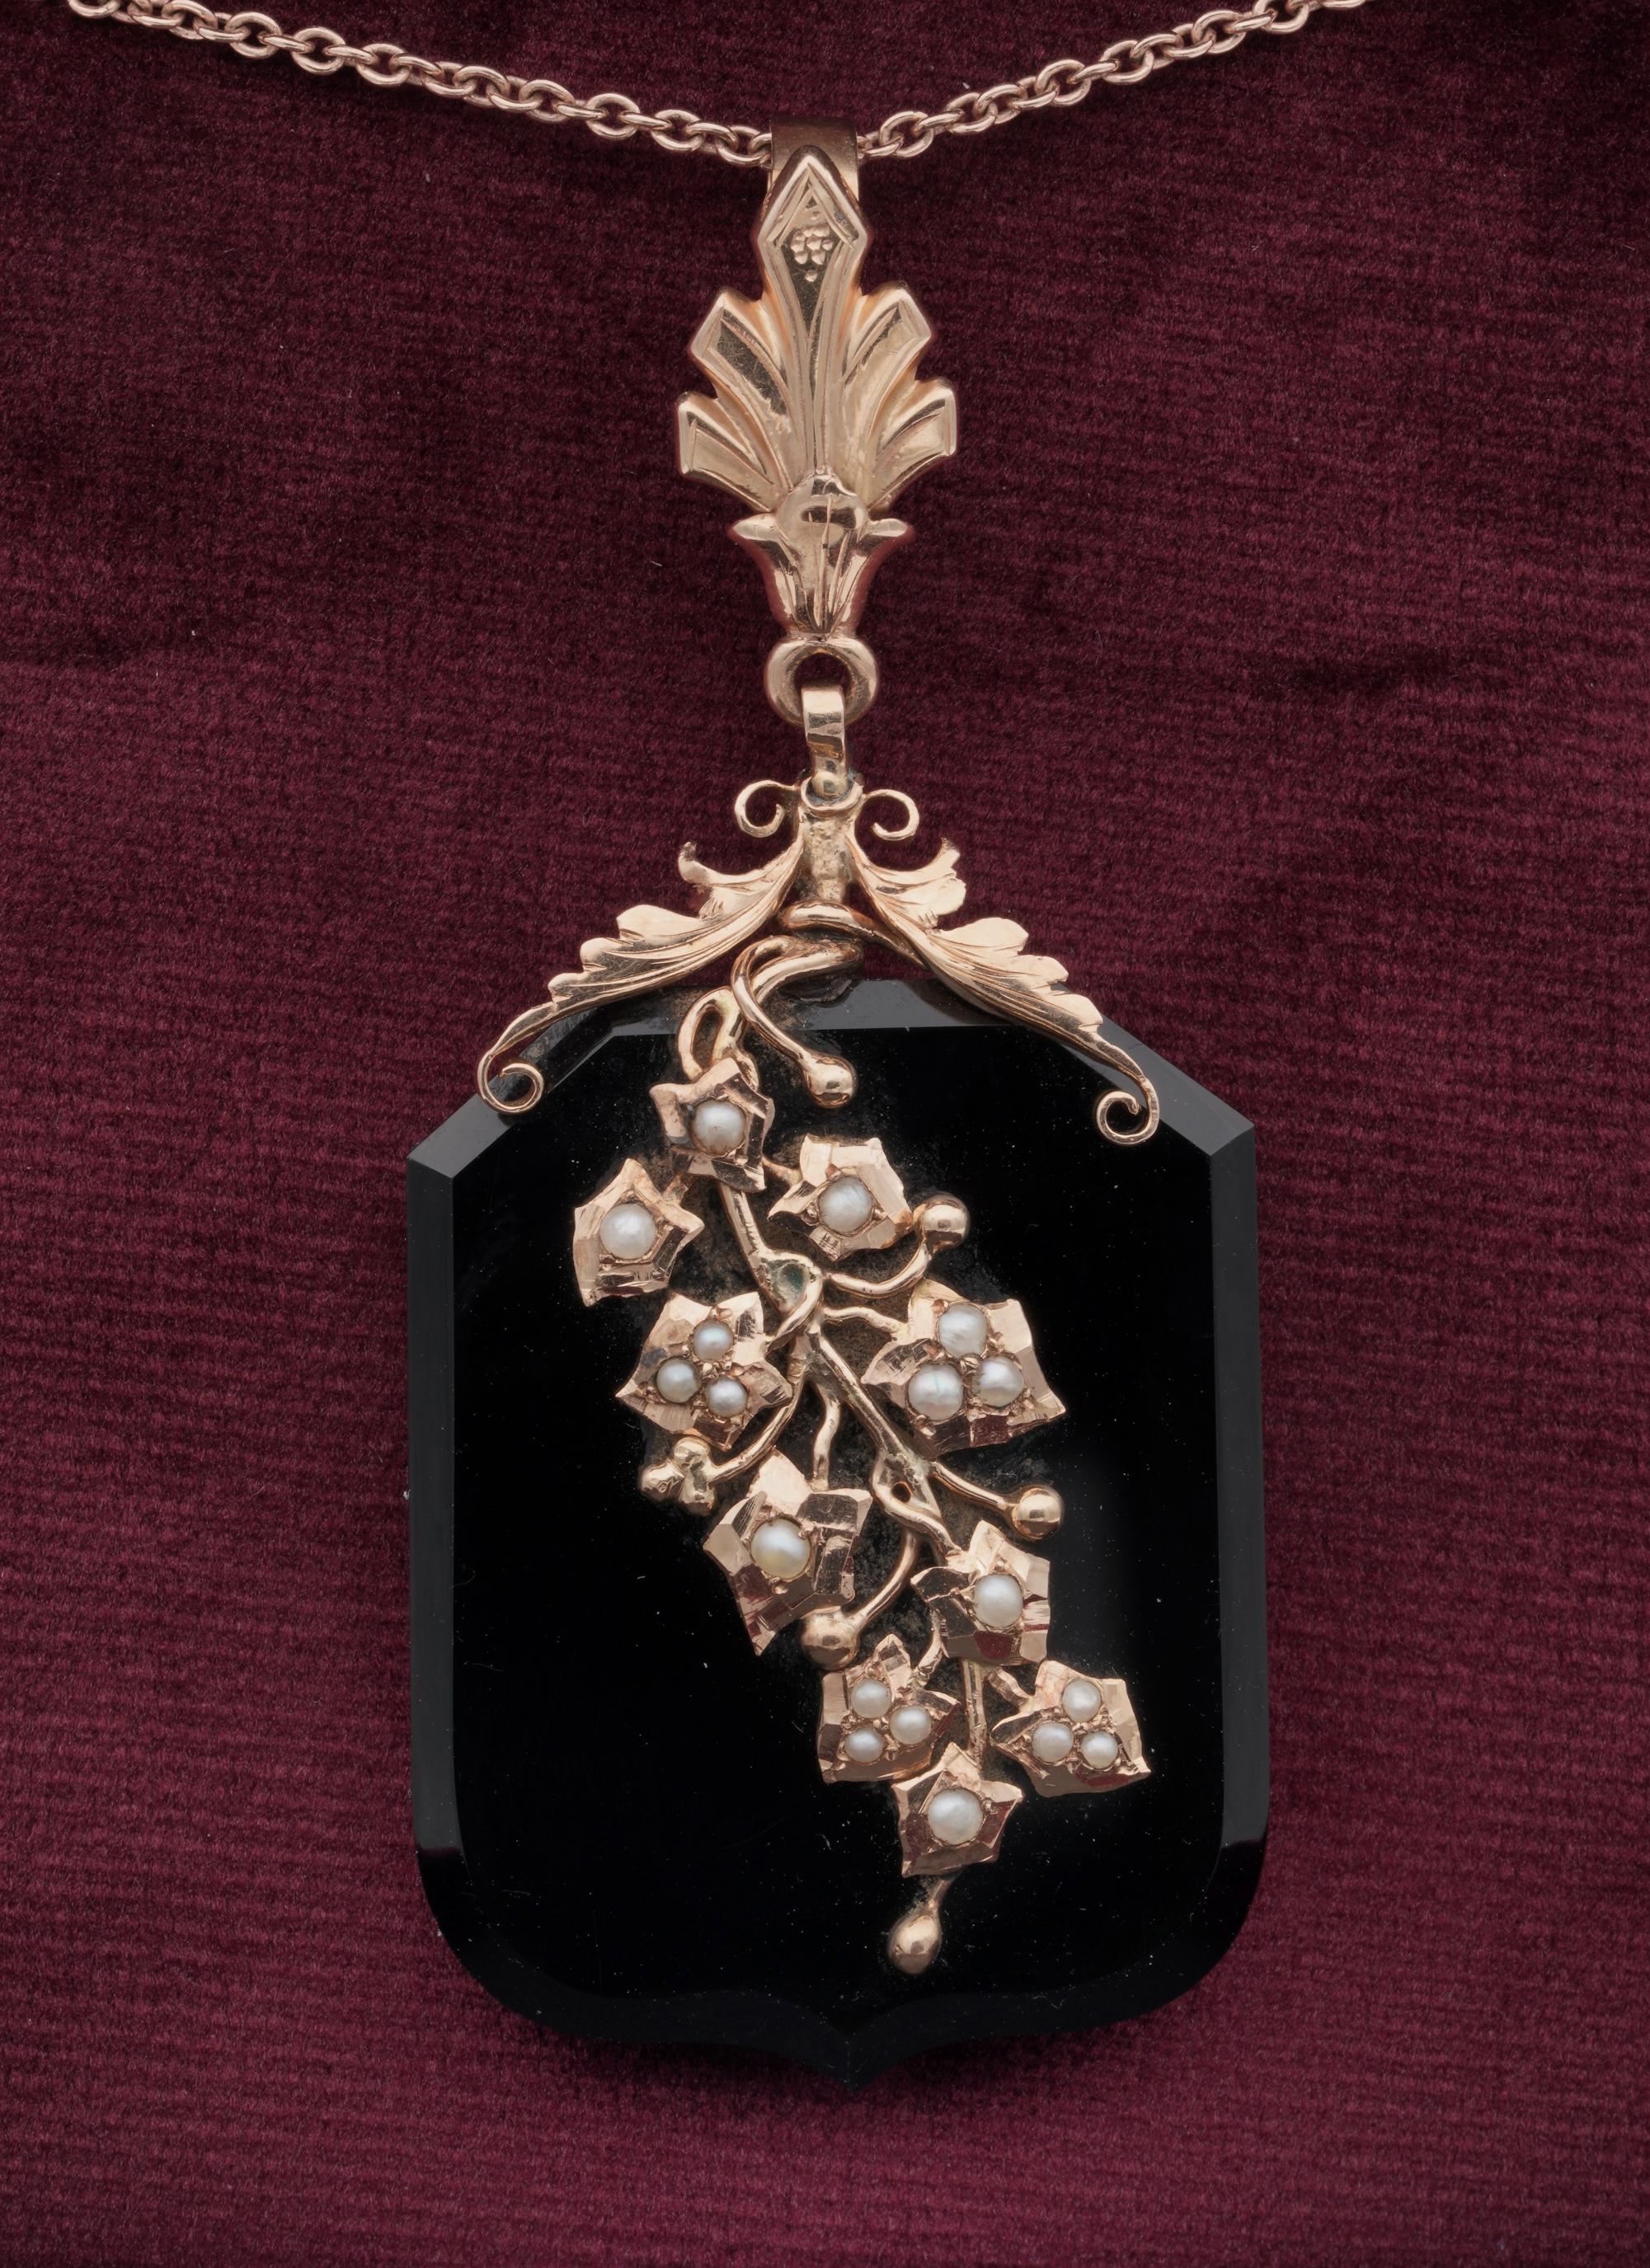 Love Remembrance Keeper

A lovely Victorian example of Black Onyx locket beautifully hand carved into an unusual shield shape
Adorned with a rich drape of leaf work covering almost the whole front up of the locket, enriched with little natural